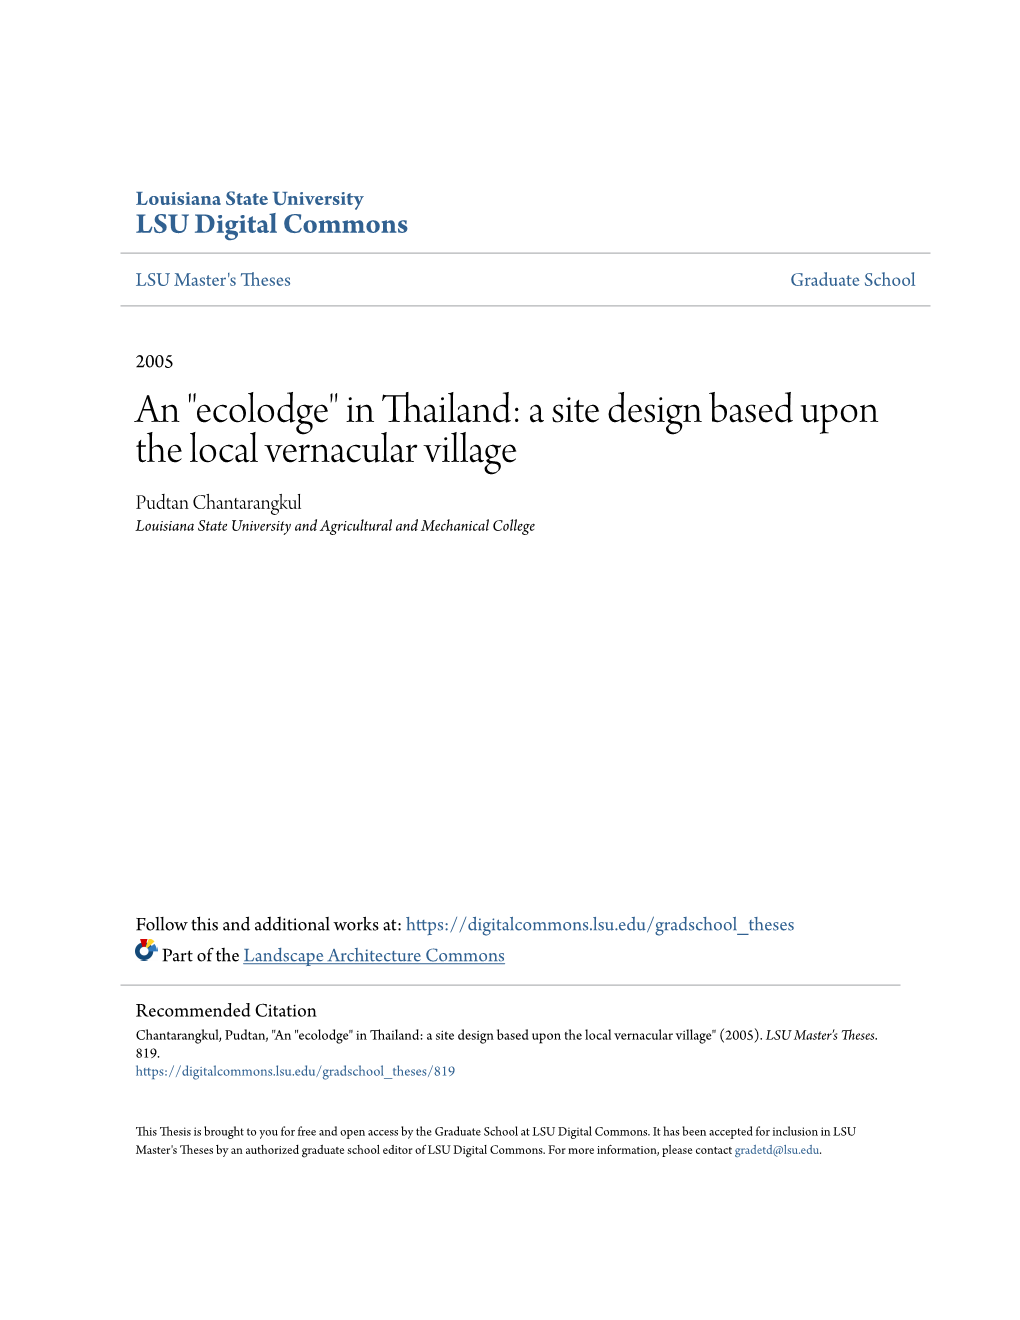 In Thailand: a Site Design Based Upon the Local Vernacular Village Pudtan Chantarangkul Louisiana State University and Agricultural and Mechanical College